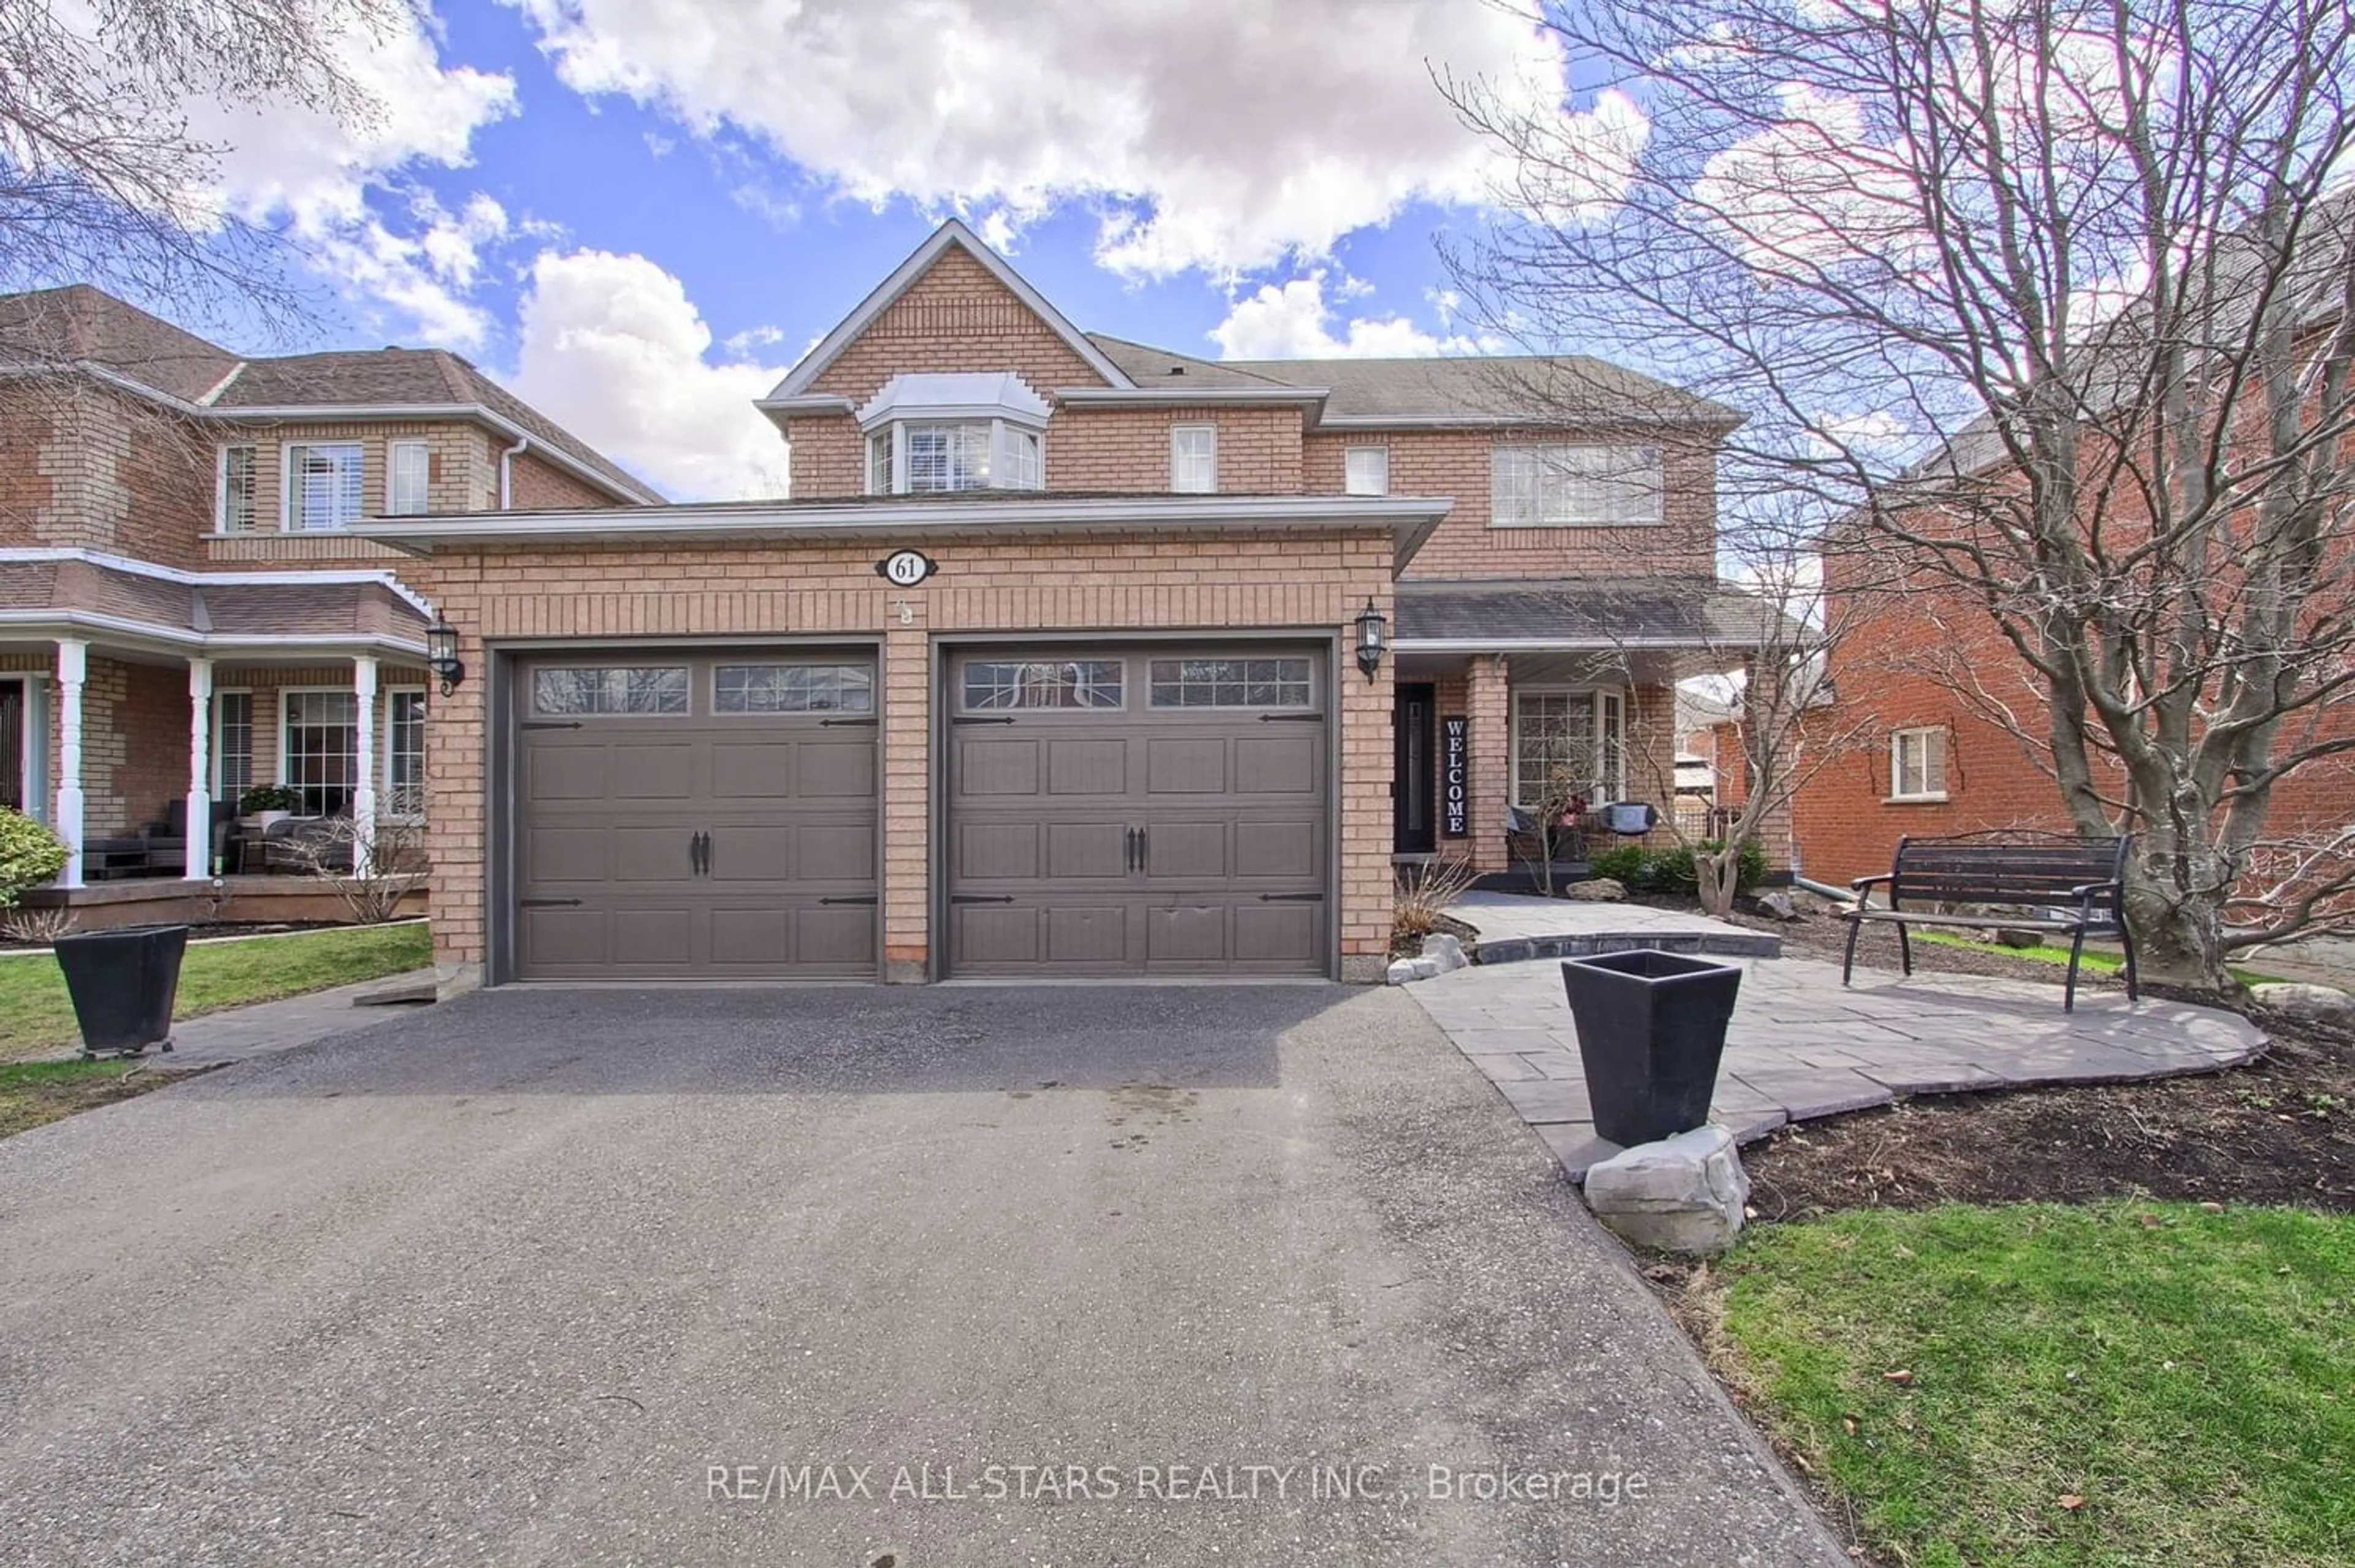 Home with brick exterior material for 61 Jacob Way, Whitchurch-Stouffville Ontario L4A 1K8